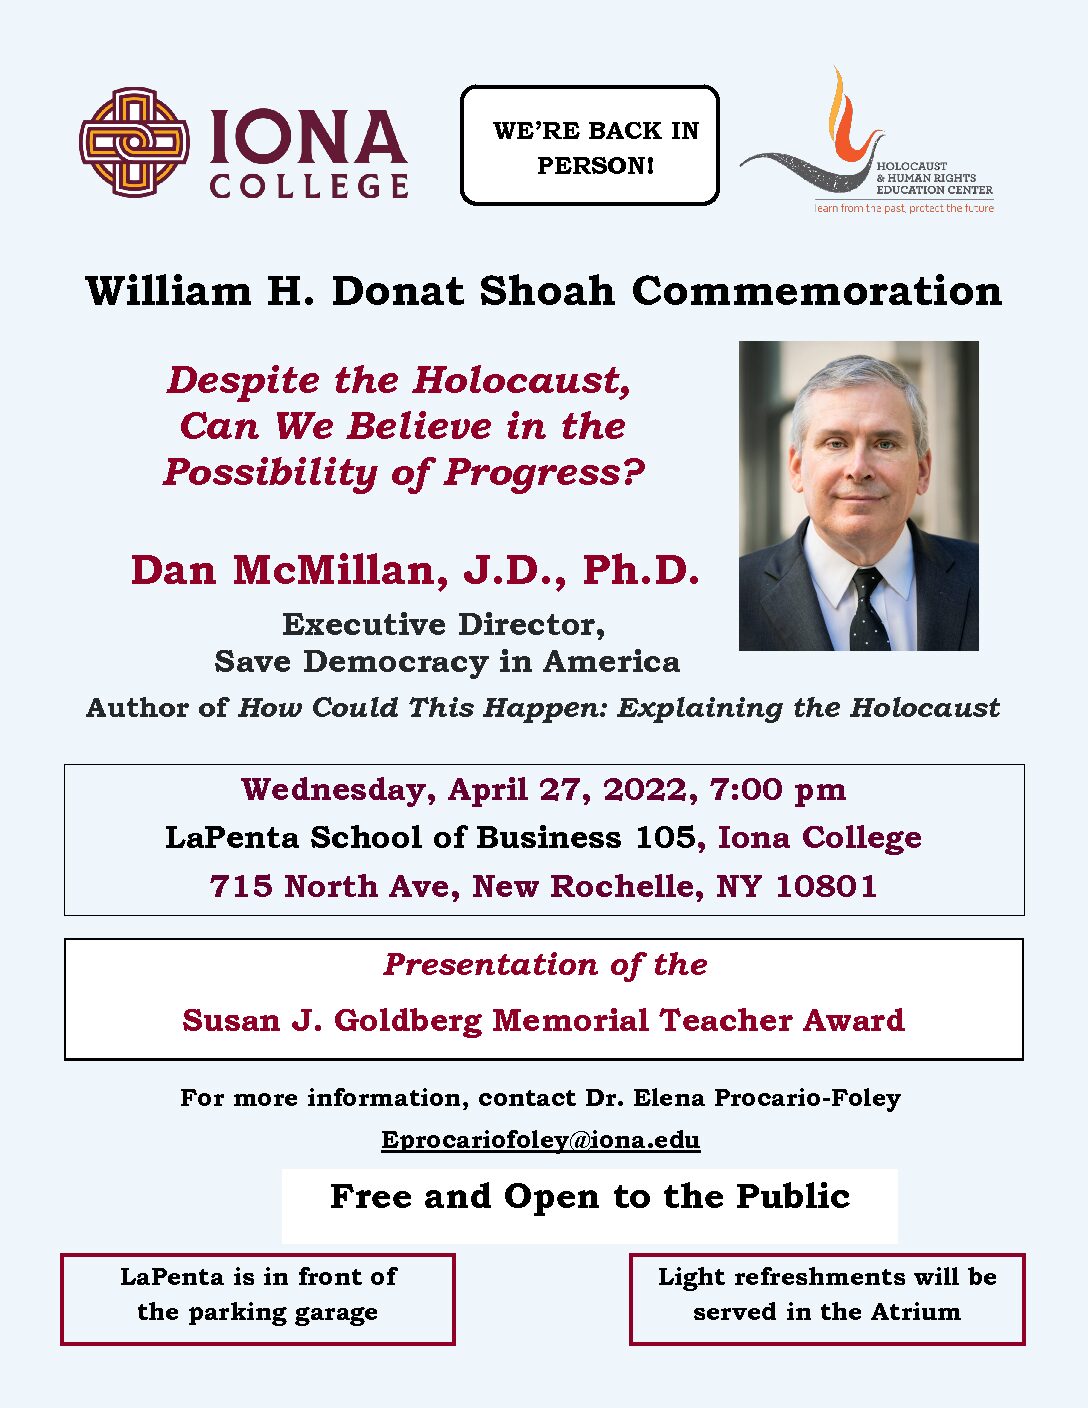 Holocaust & Human Rights Education Center and Iona College William H. Donat Shoah Commemoration: Despite The Holocaust, Can We Believe in the Possibility of Progress? – Dan McMillan, J.D., Ph.D. To Speak